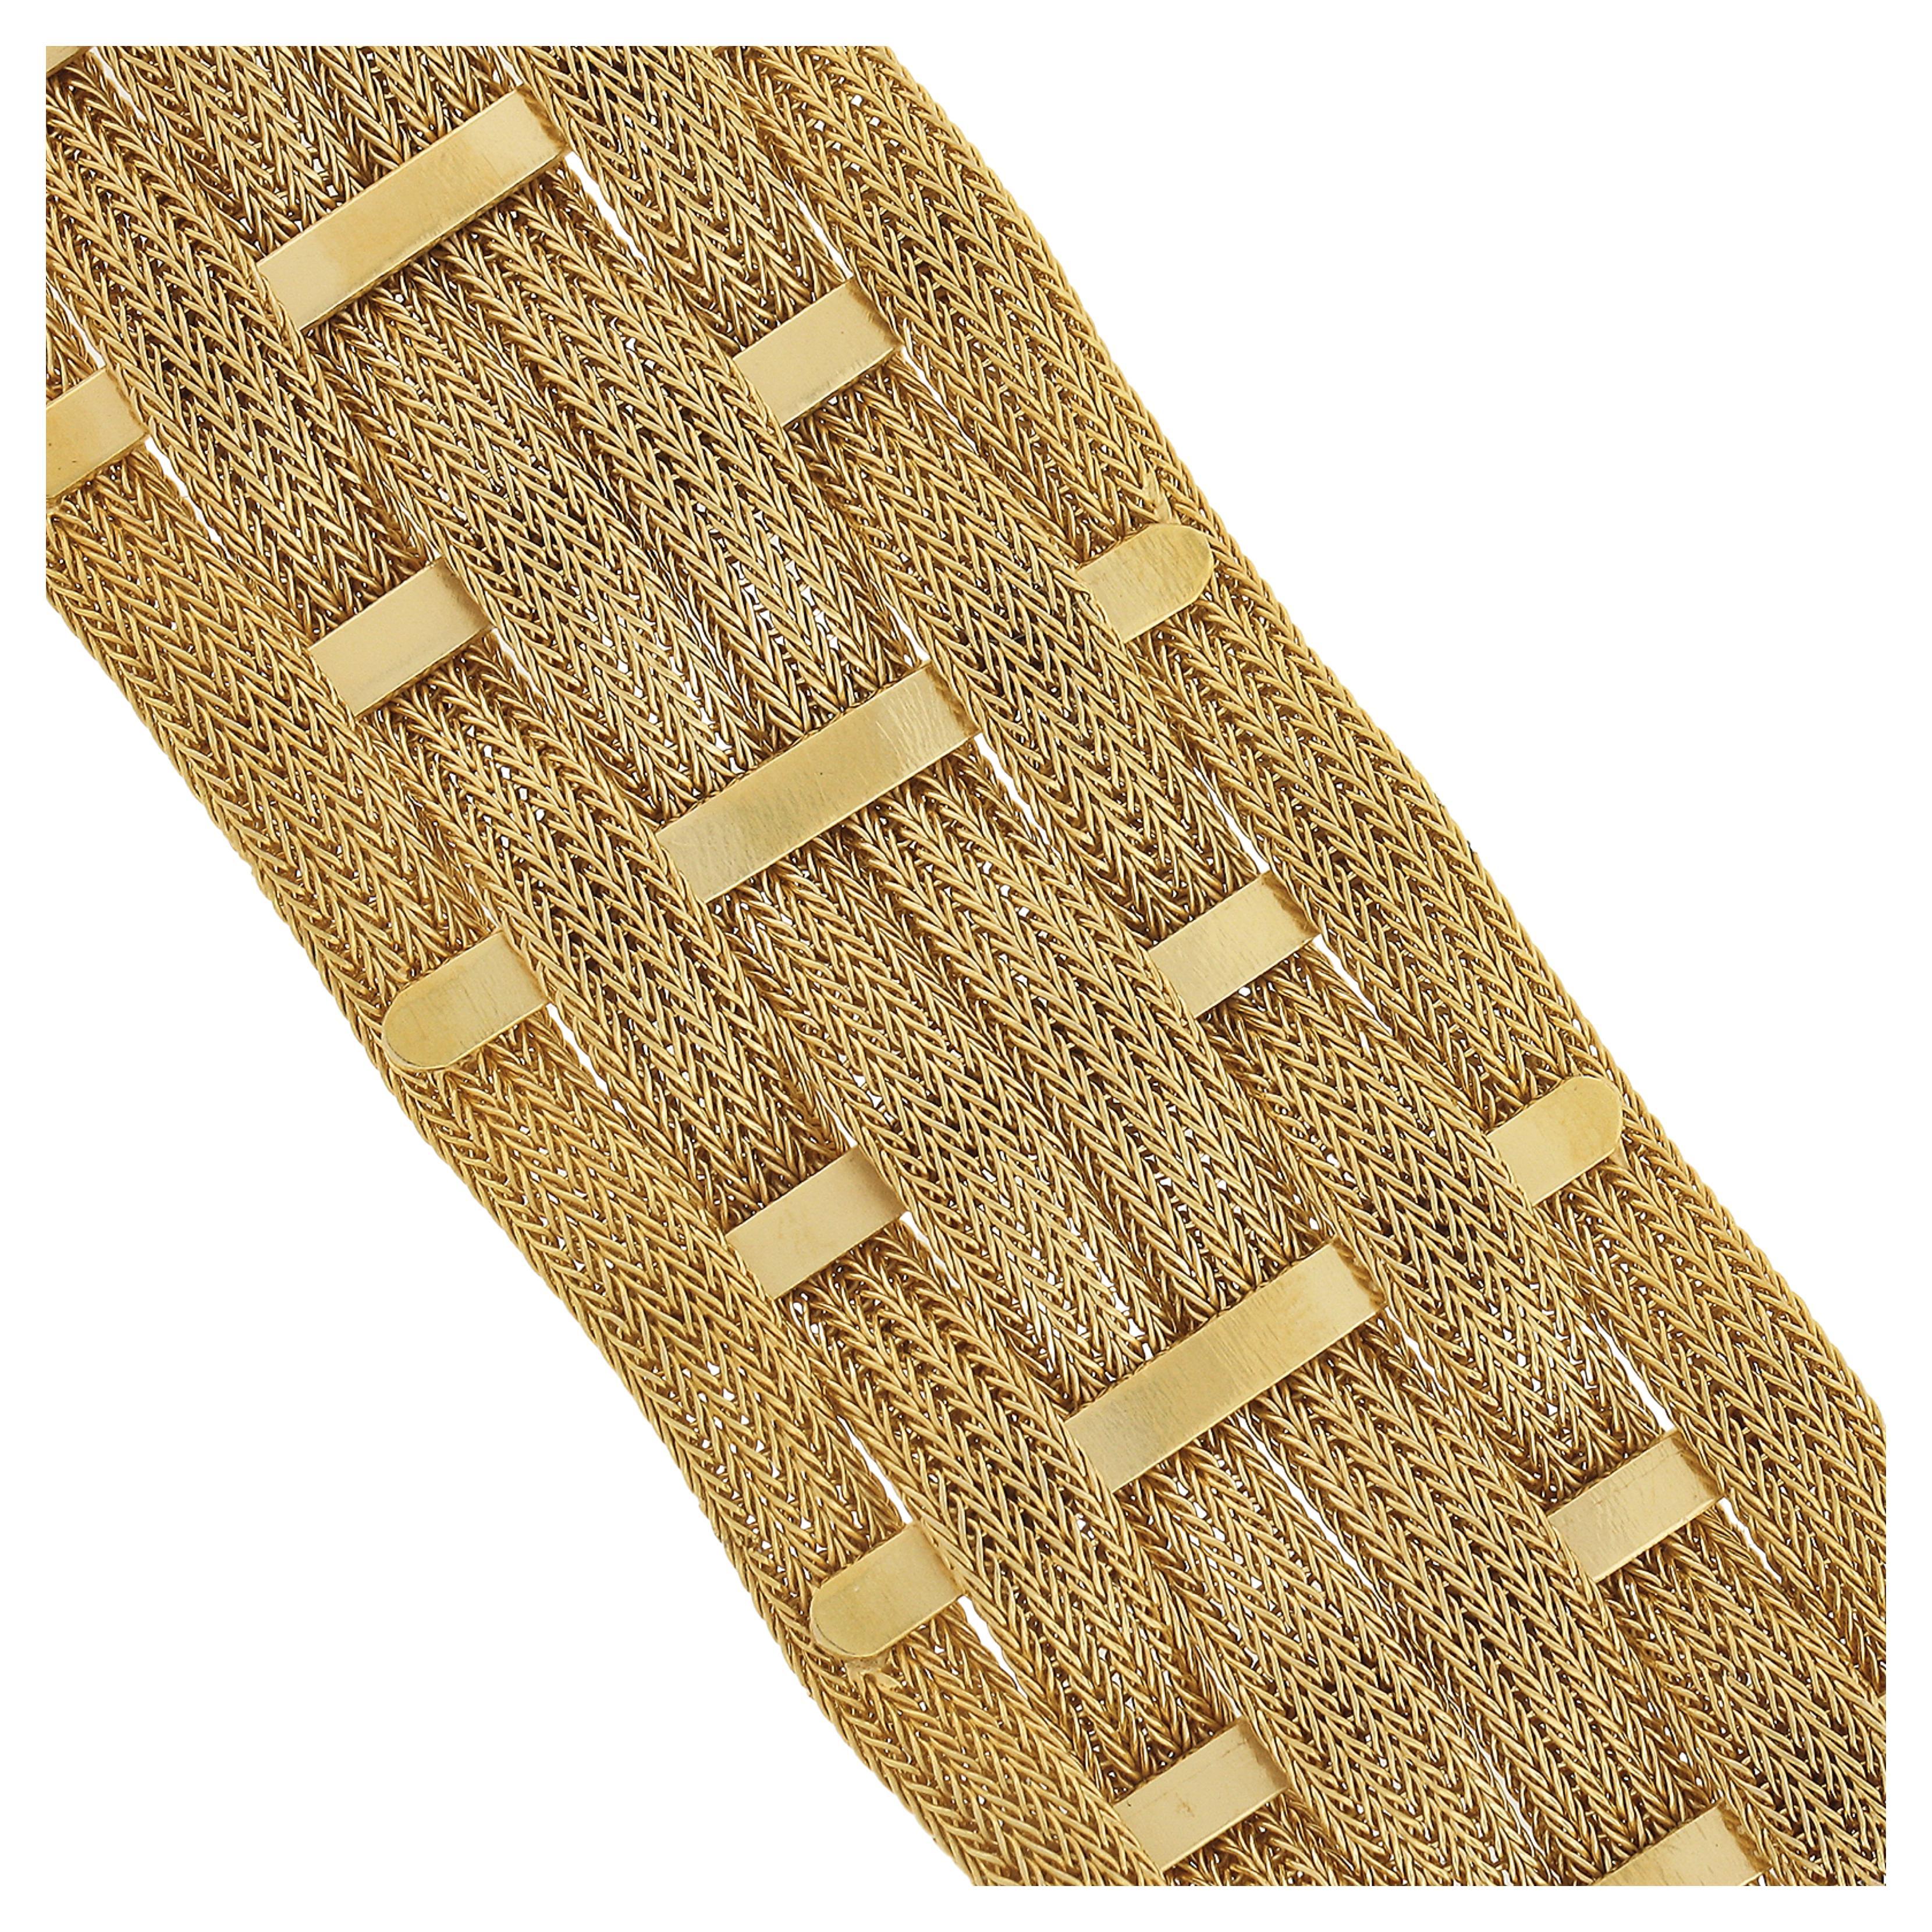 This truly elegant and unique vintage bracelet was crafted in solid 18k yellow gold and features approximately 1.1 inch wide woven mesh link that is silky smooth on the wrist. The bracelet consist of 6 woven chains that uniquely wave up and down and